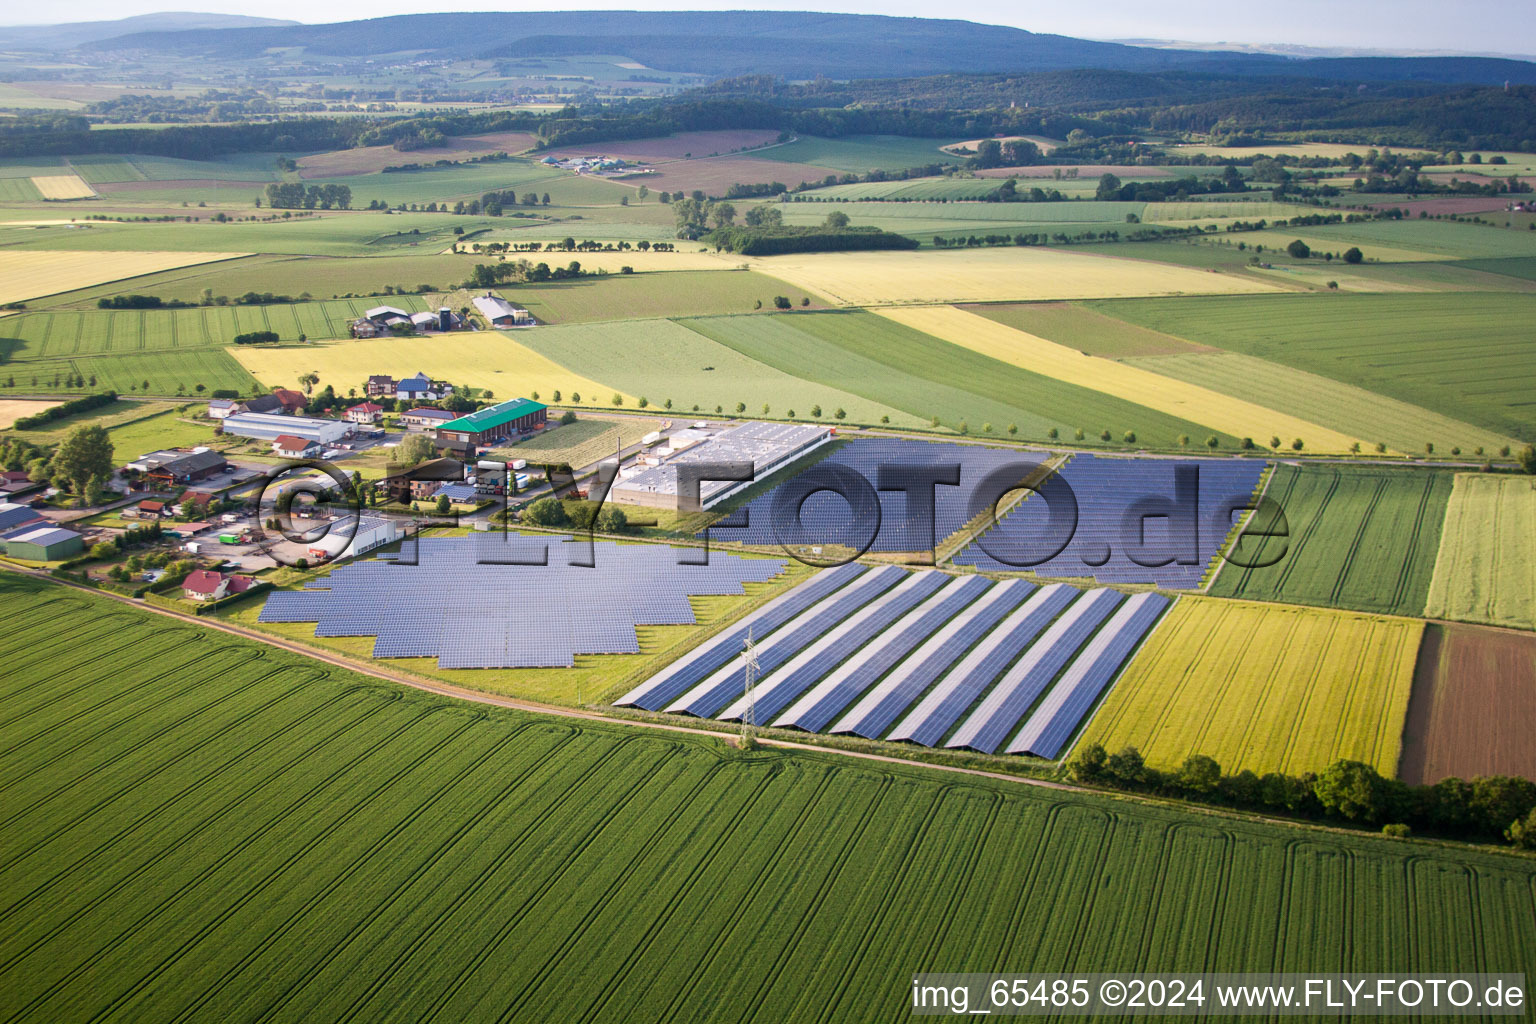 Aerial view of Panel rows of photovoltaic and solar farm or solar power plant in the district Bredenborn in Marienmuenster in the state North Rhine-Westphalia